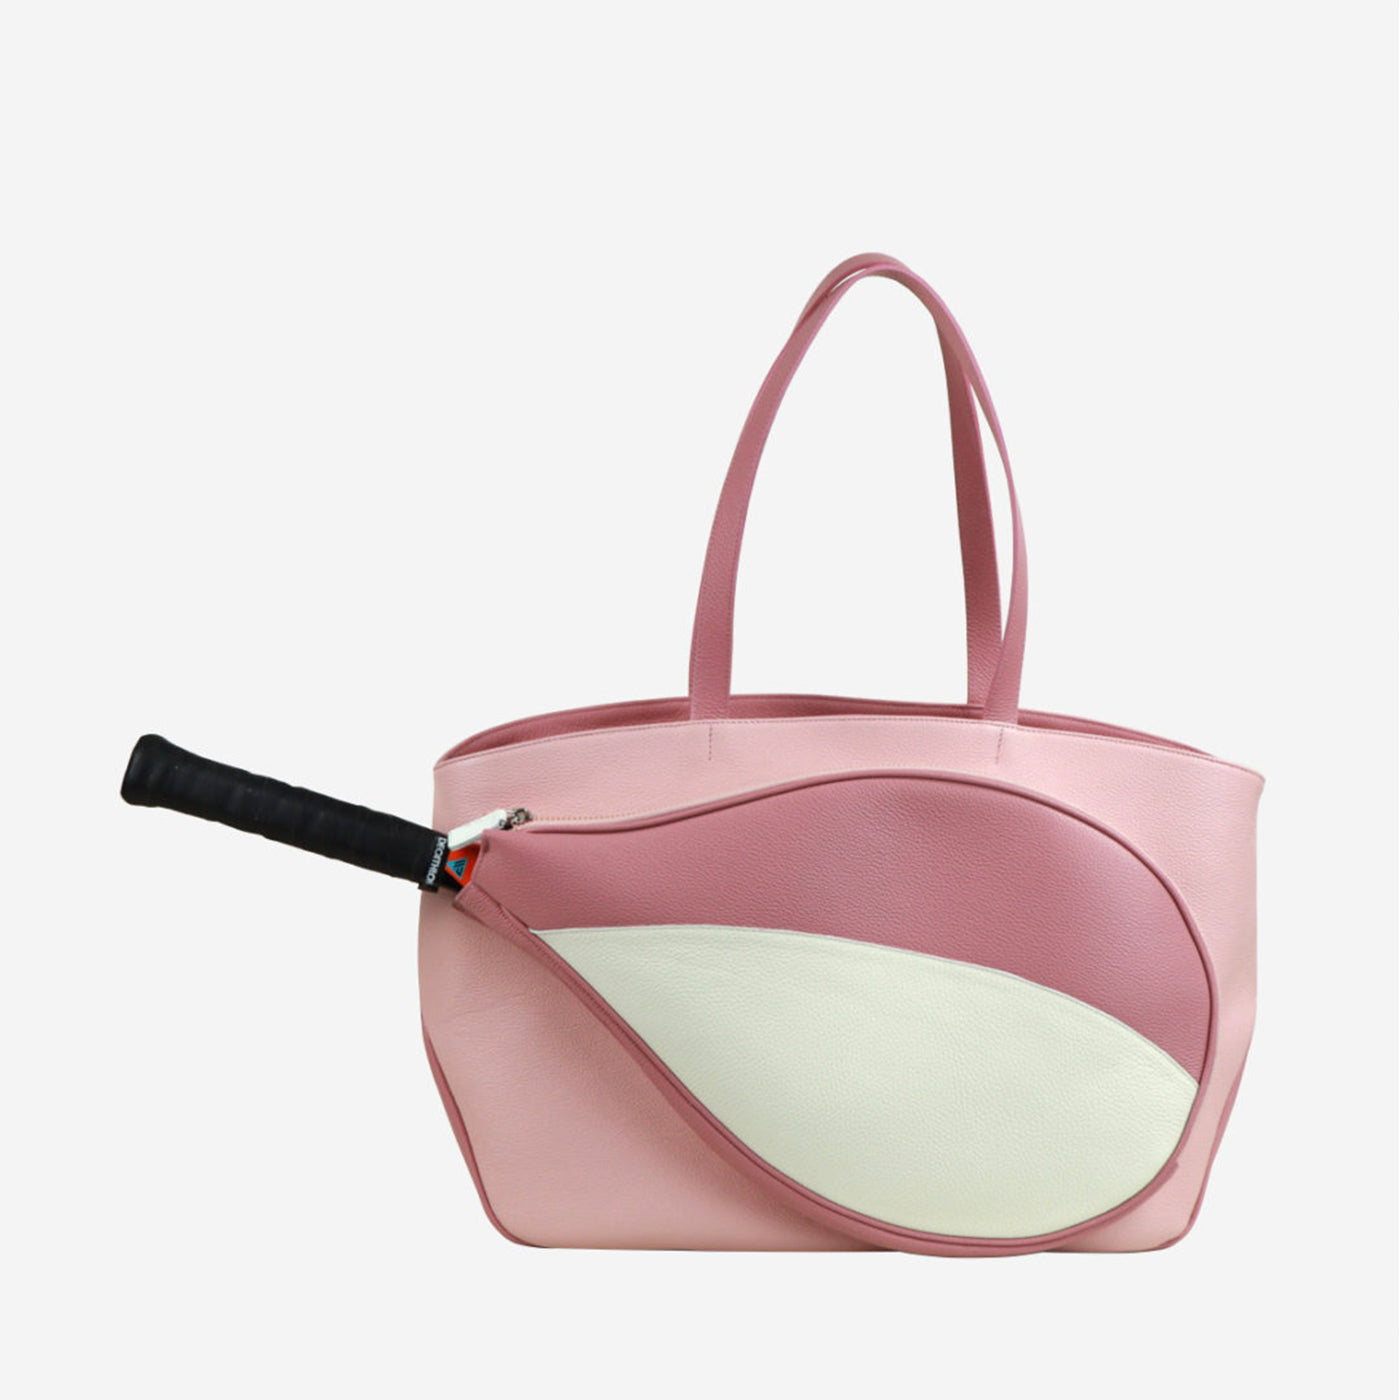 Sport Pink and White Bag With Tennis-Racket-Shaped Pocket - Alternative view 5